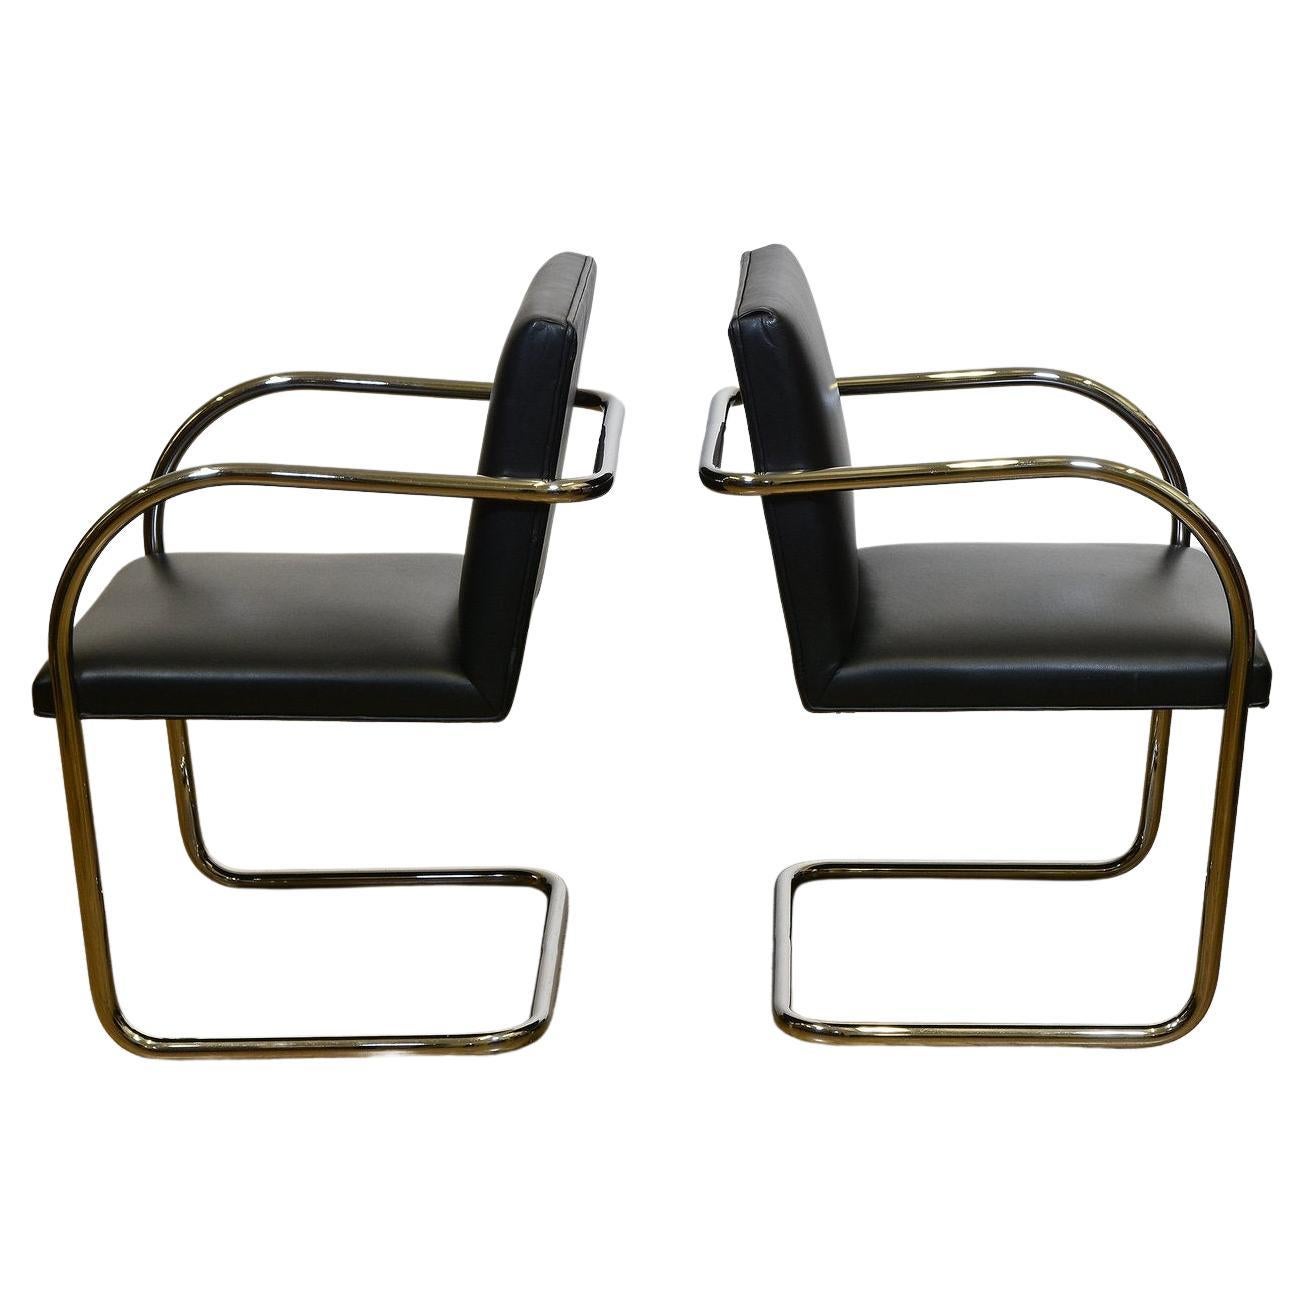 Late 20th Century Pair of Mies Van Der Rohe Tubular Chrome Black Leather Brno Chairs by Knoll 1980